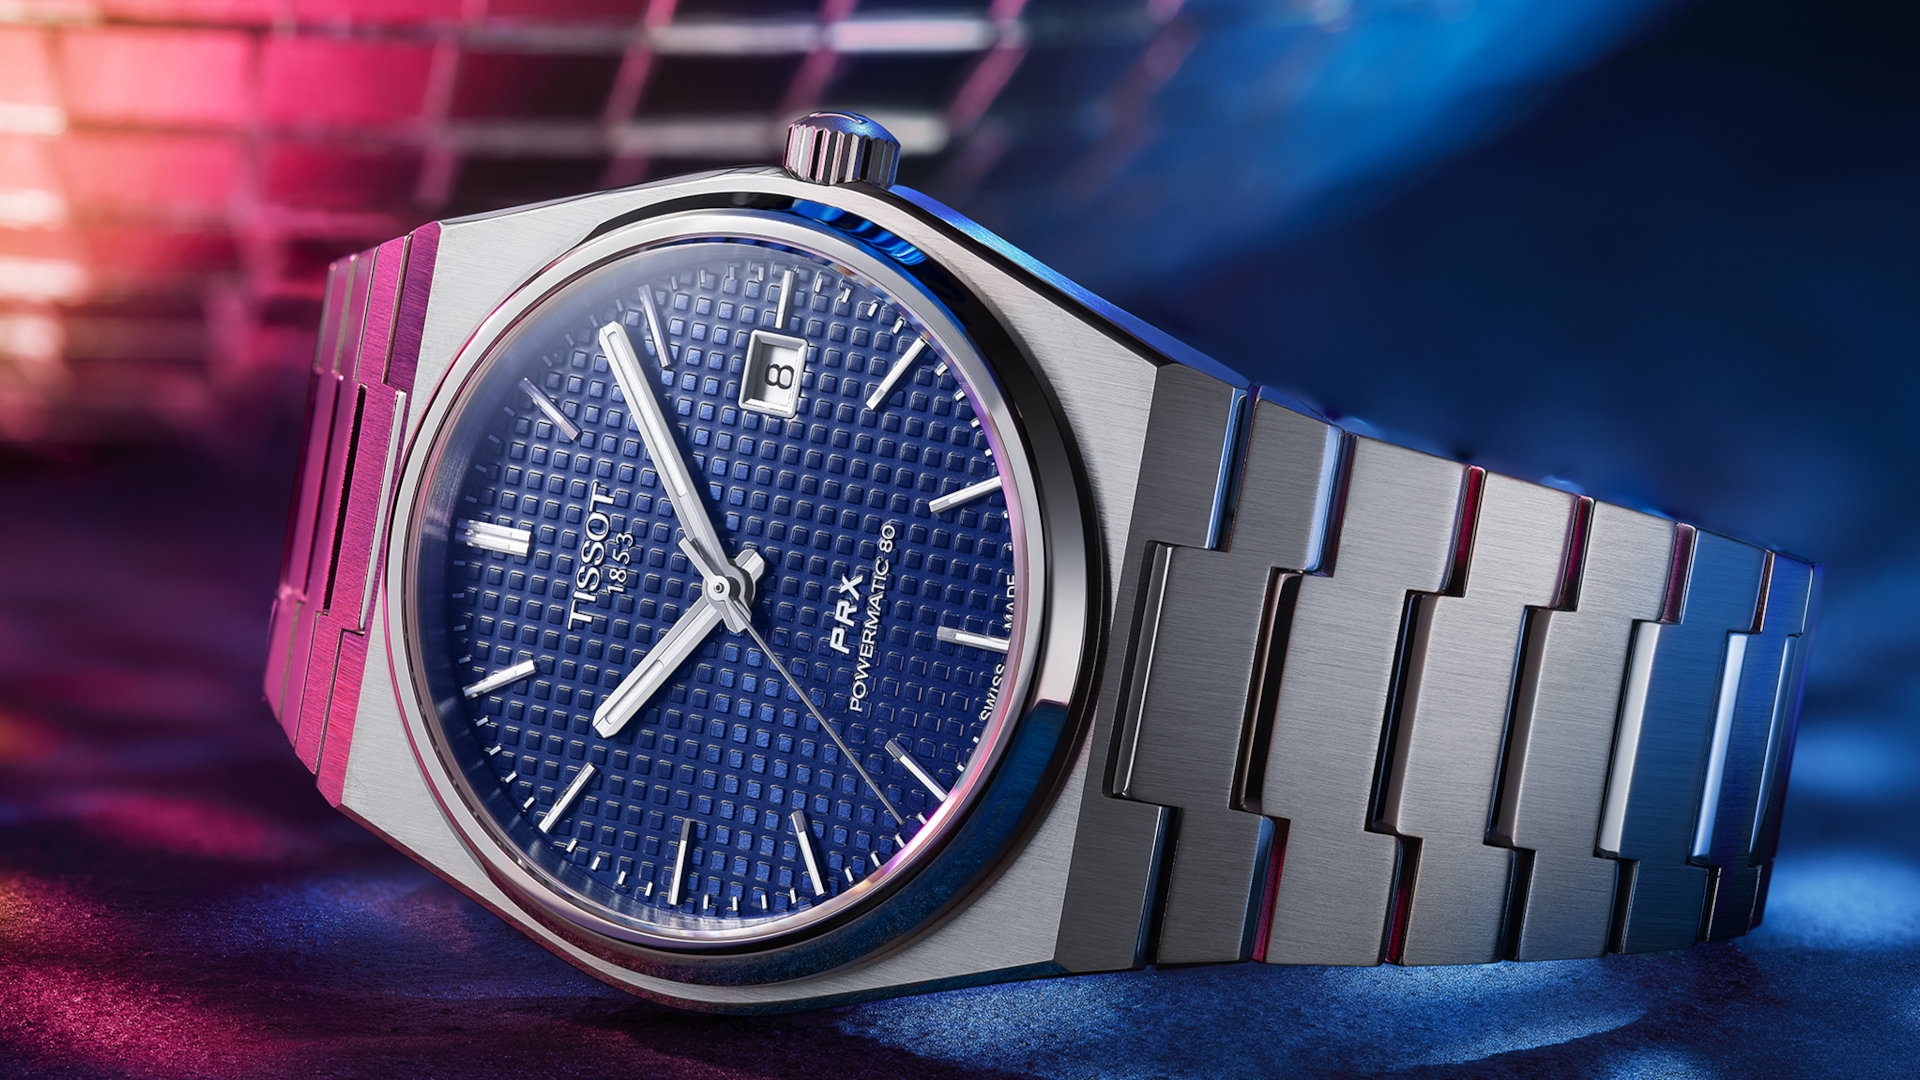 70s Chic is back with the Tissot PRX Powermatic 80